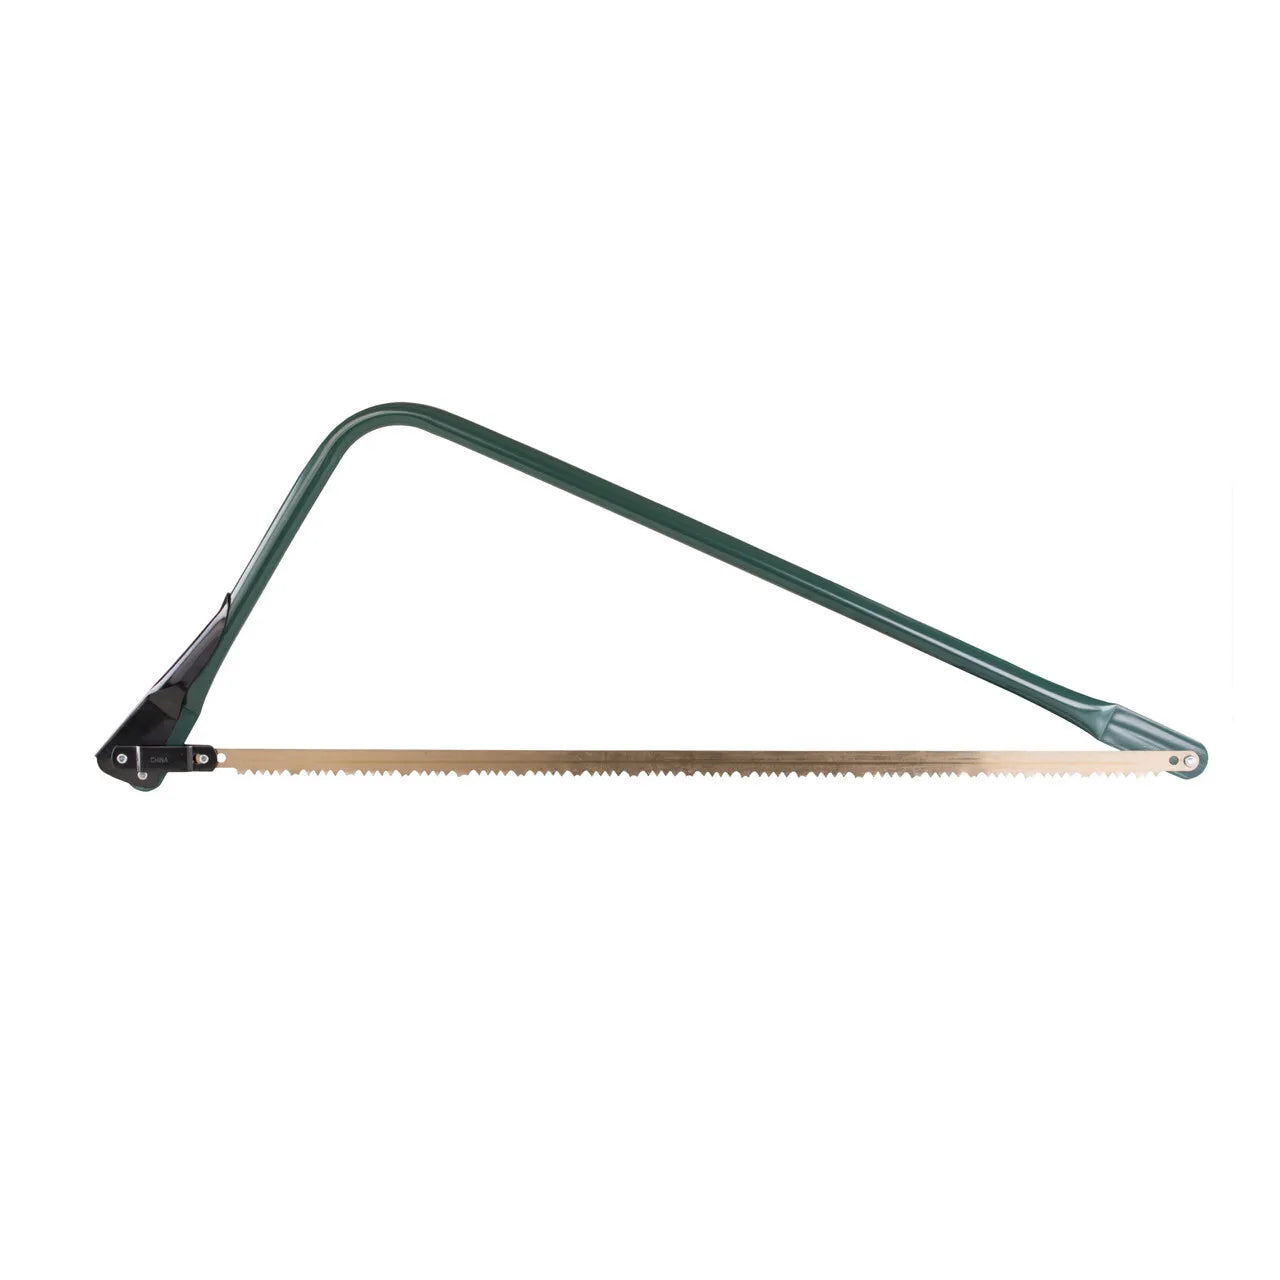 Stansport | 24" Utility Steel Bow Saw